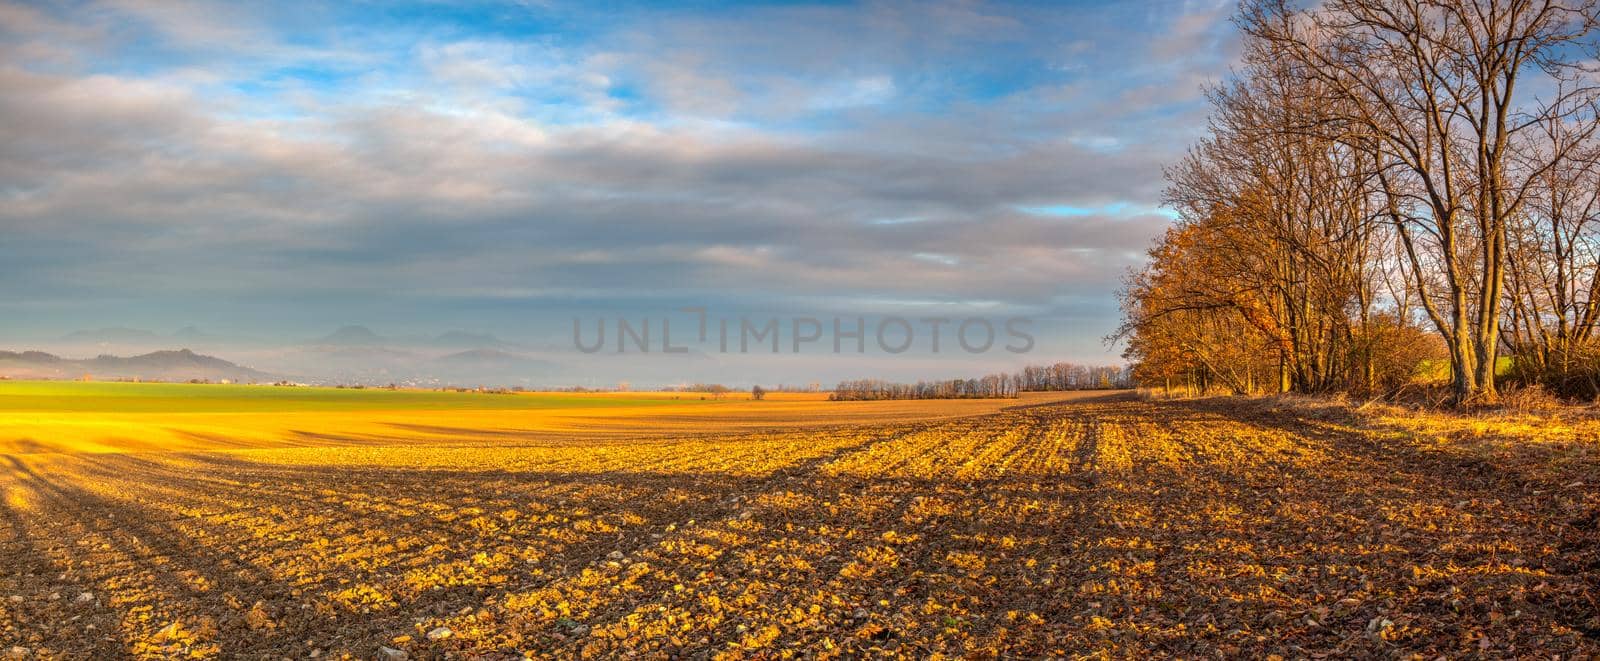 Autumn morning landscape over the city of Louny. Autumn plowed field at amazing sunrise. Czech Republic. Panorama image.